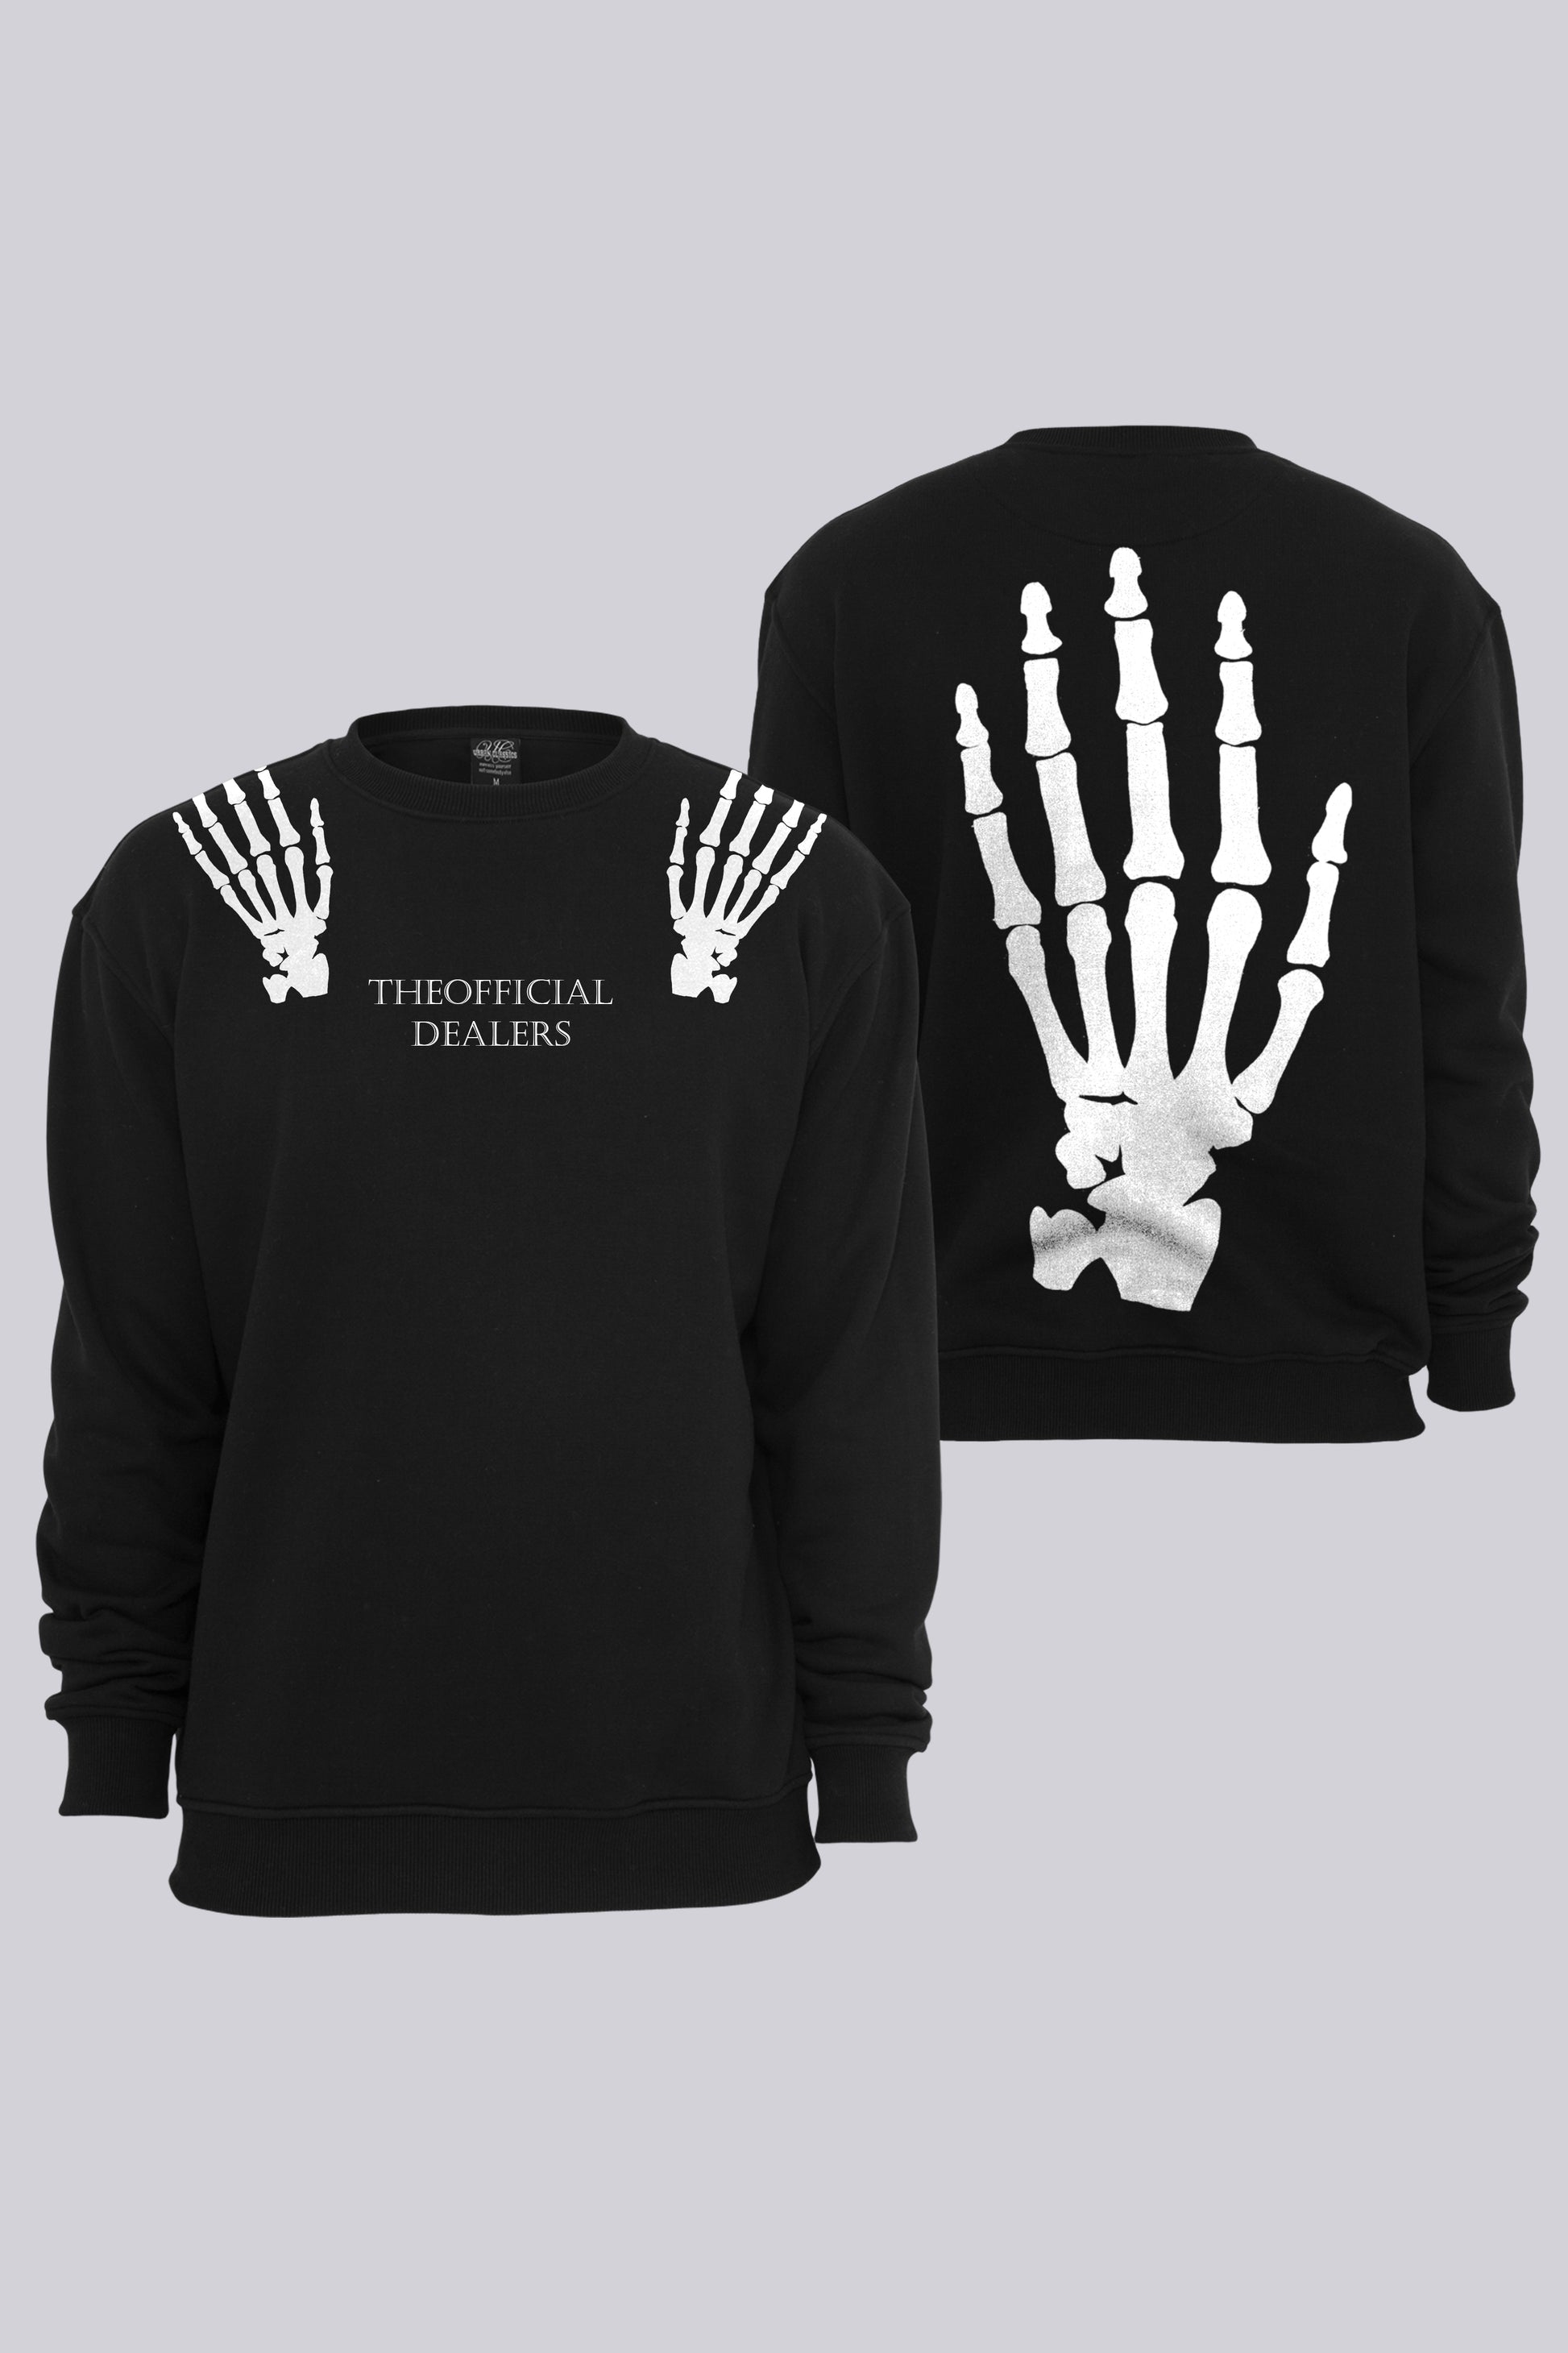 Skull Hand Streetwear T-Shirt By The Official Dealers / Top Fashion - The Official Dealers